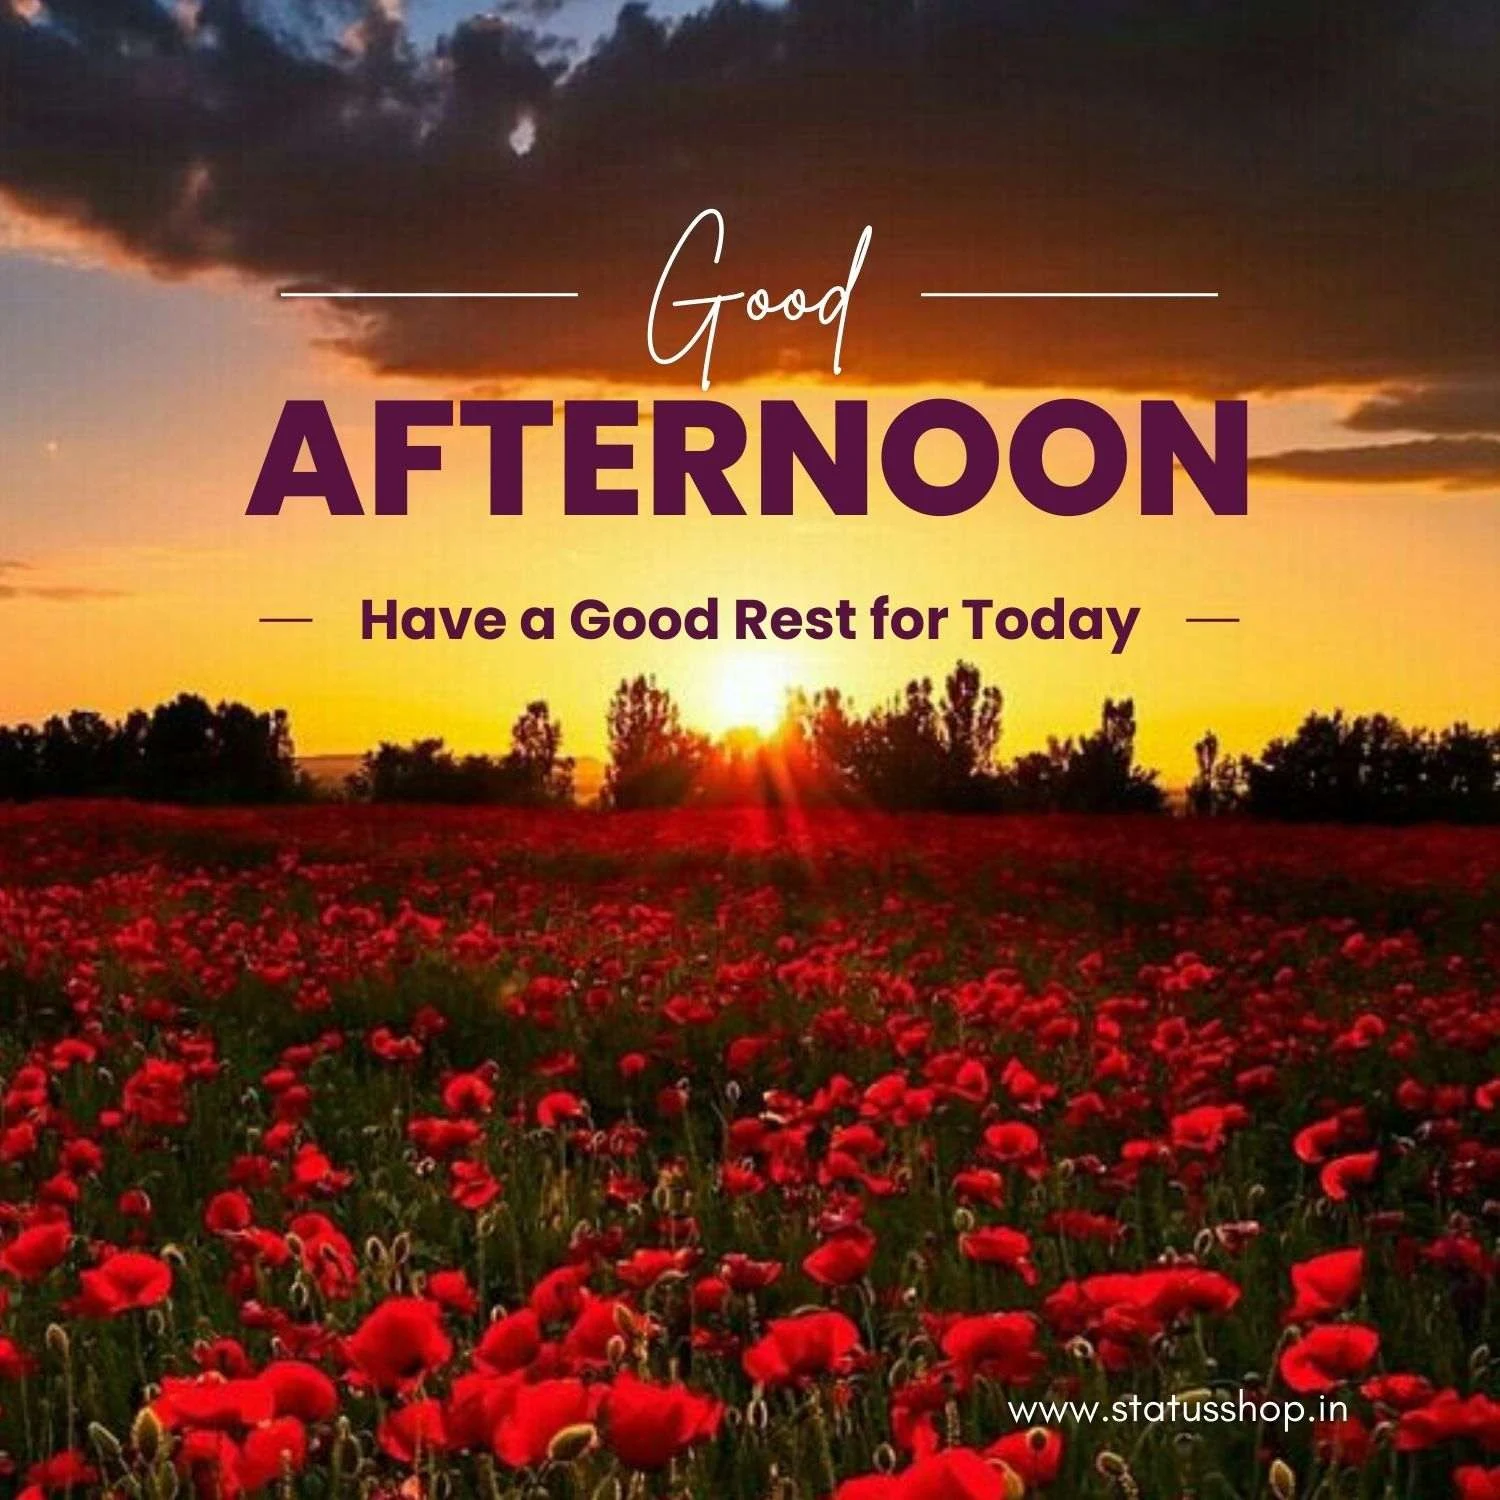 Best-Good Afternoon-Quotes